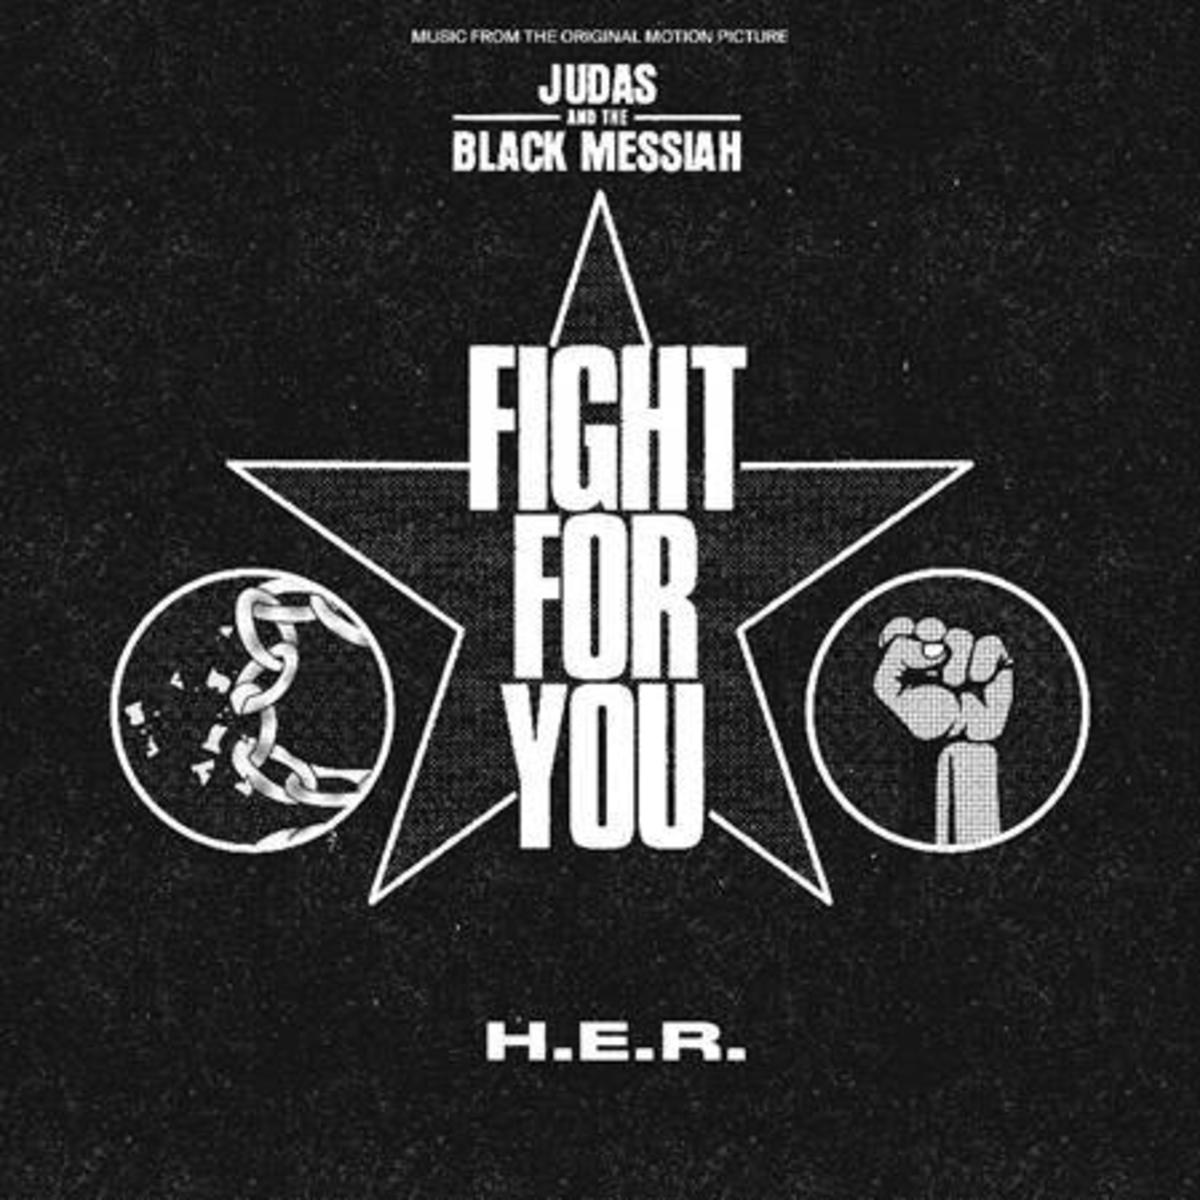 H.E.R. Releases “Fight For You” From “Judas & The Black Messiah”